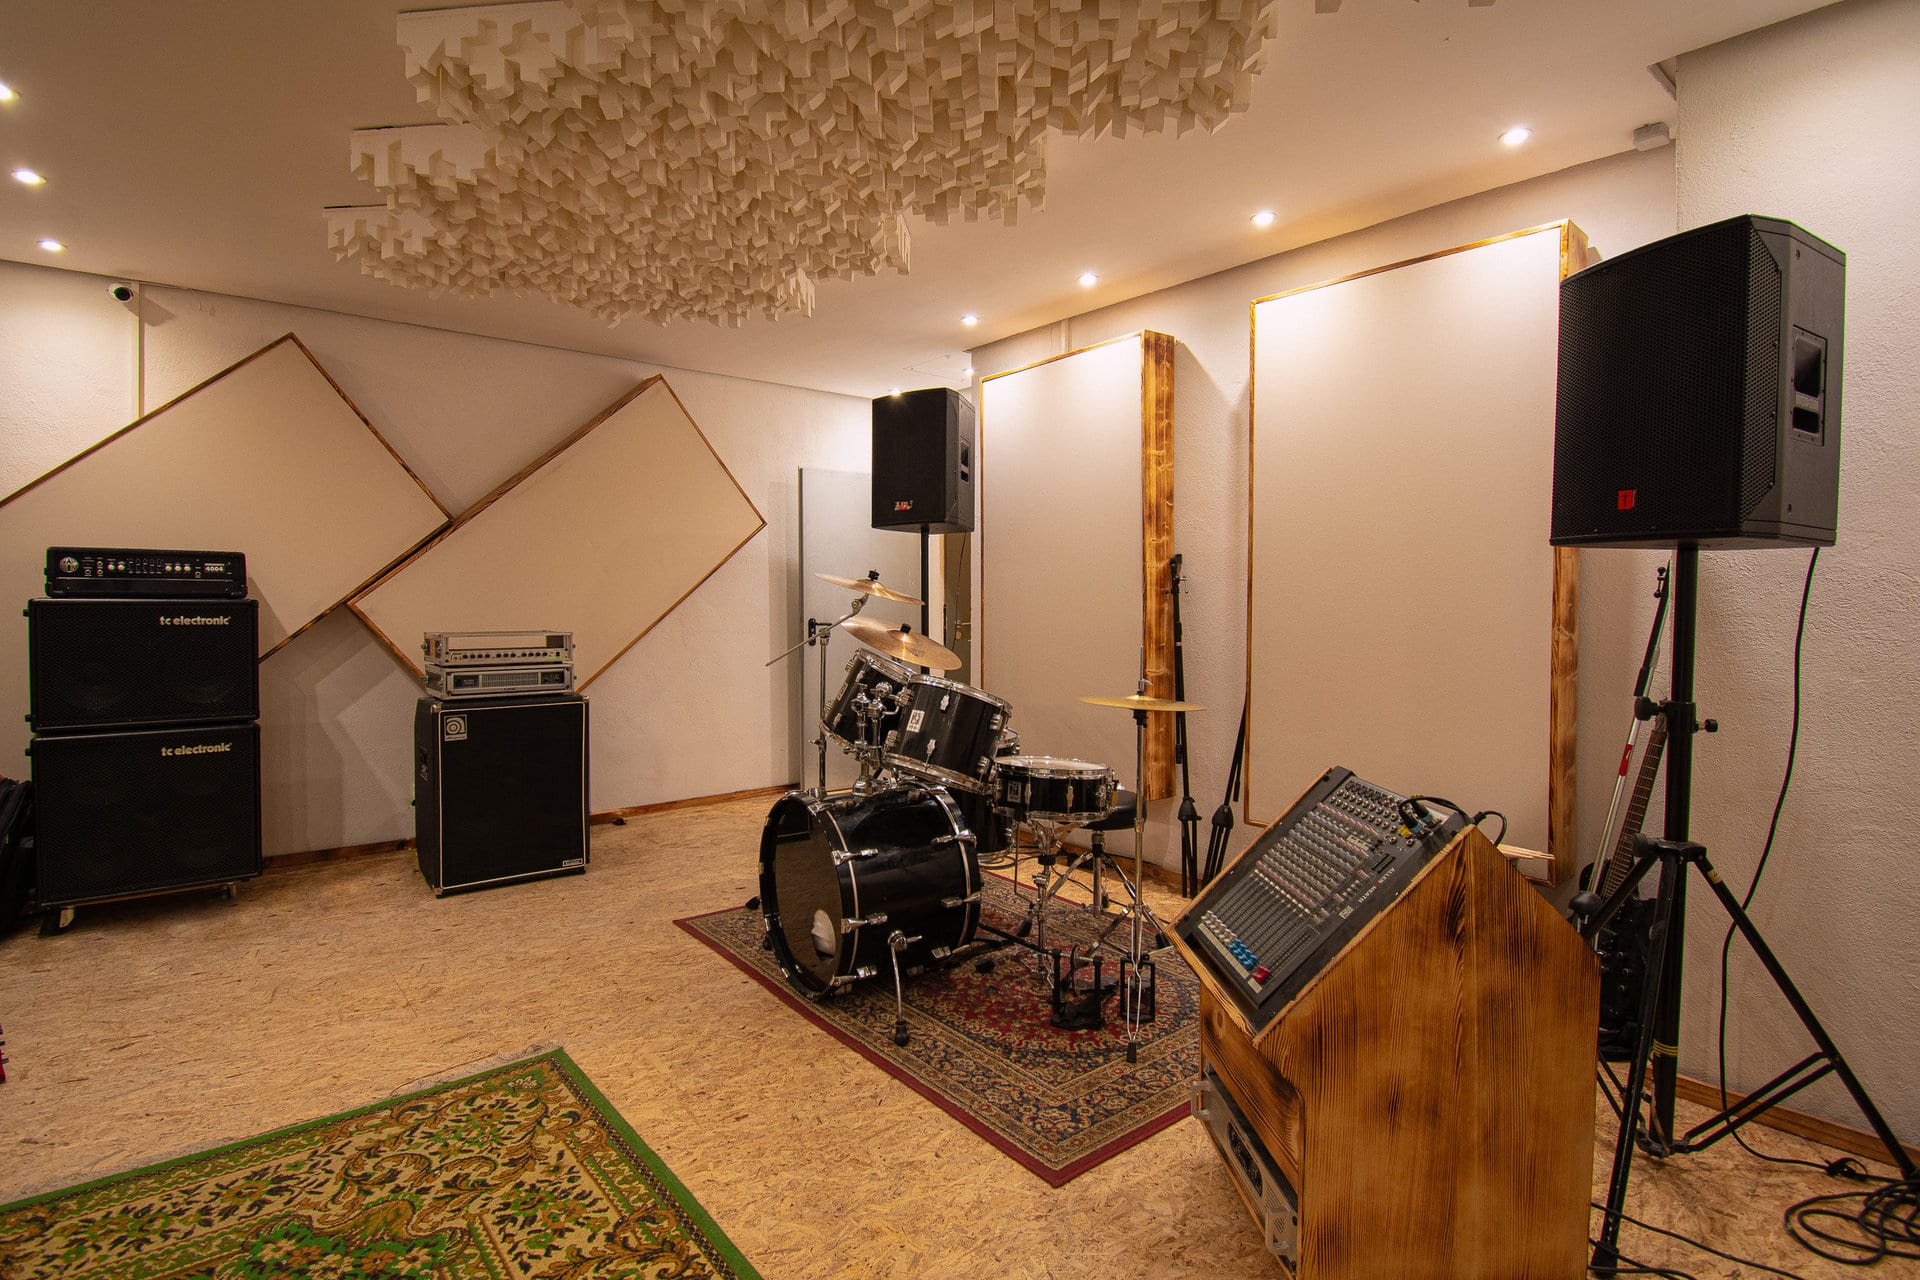 Rehearsal Room
18€/hour139€/month*32 ㎡